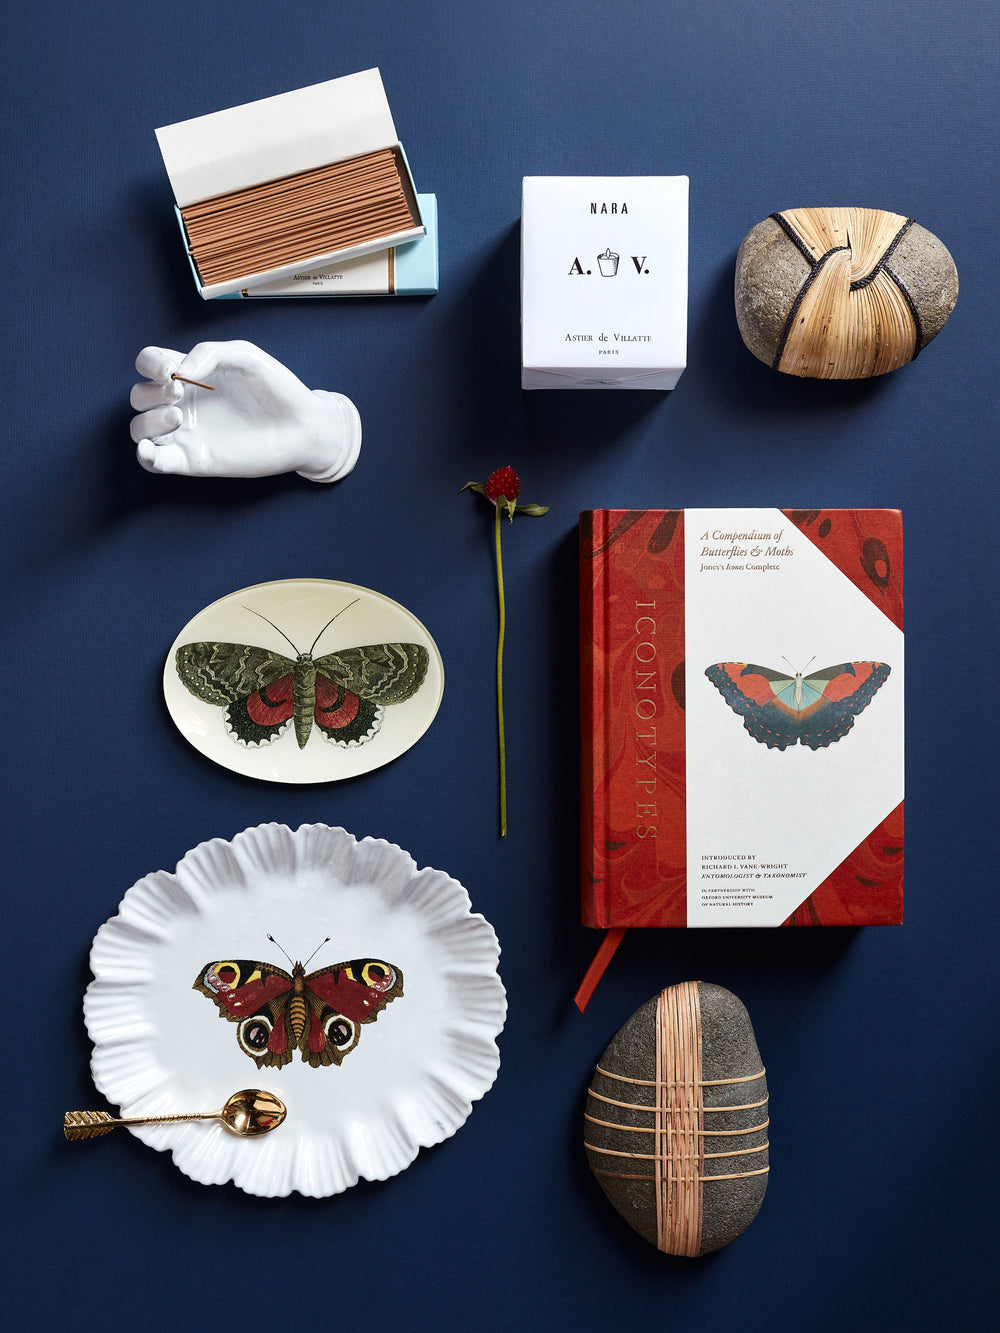 Iconotypes: A Compendium of Butterflies & Moths